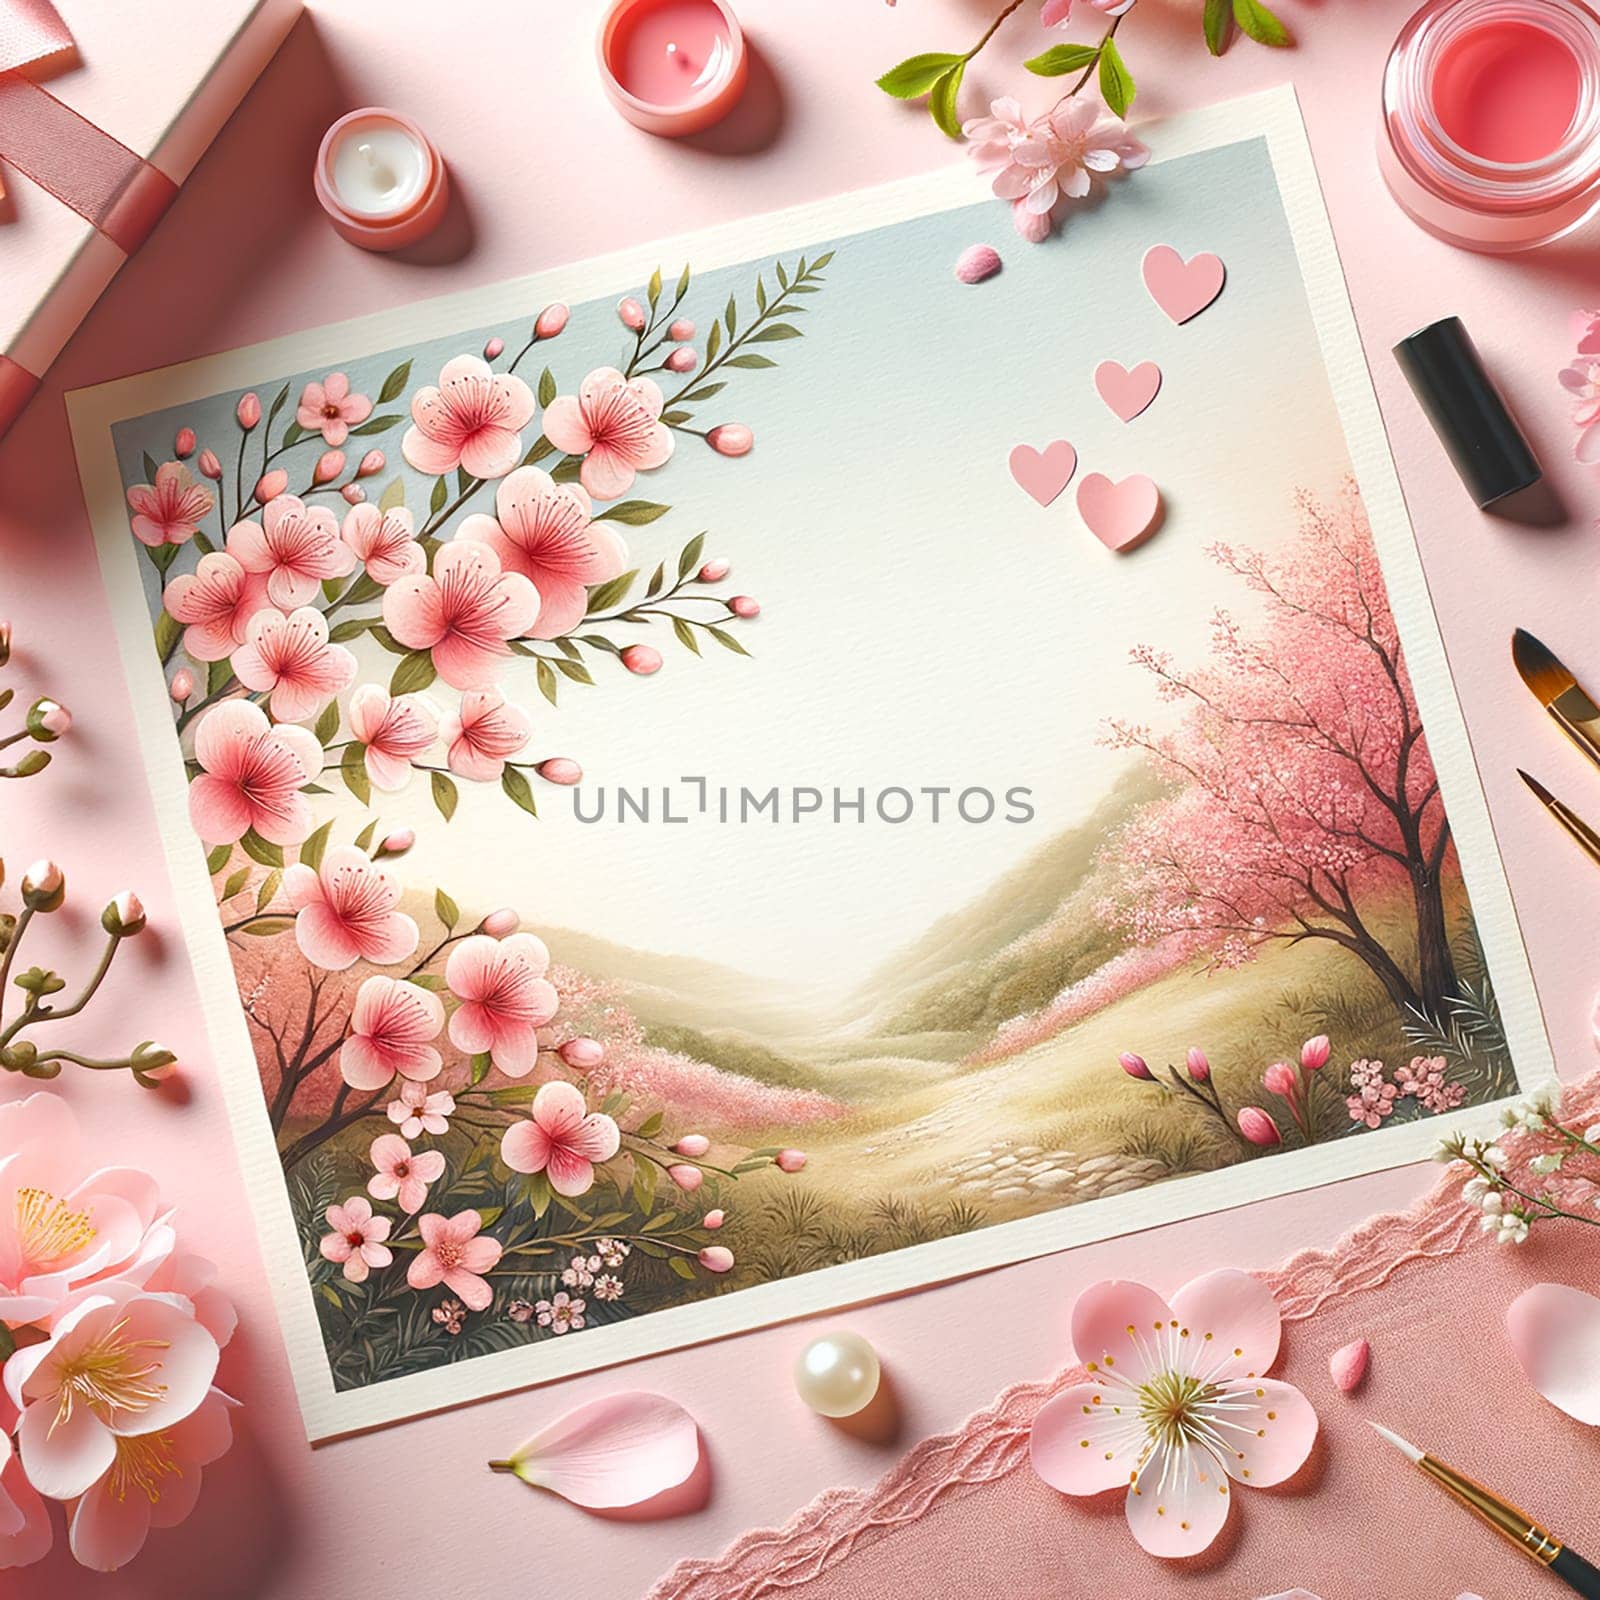 Spring Blossoms: Pink Floral Greeting Card for Woman's Day